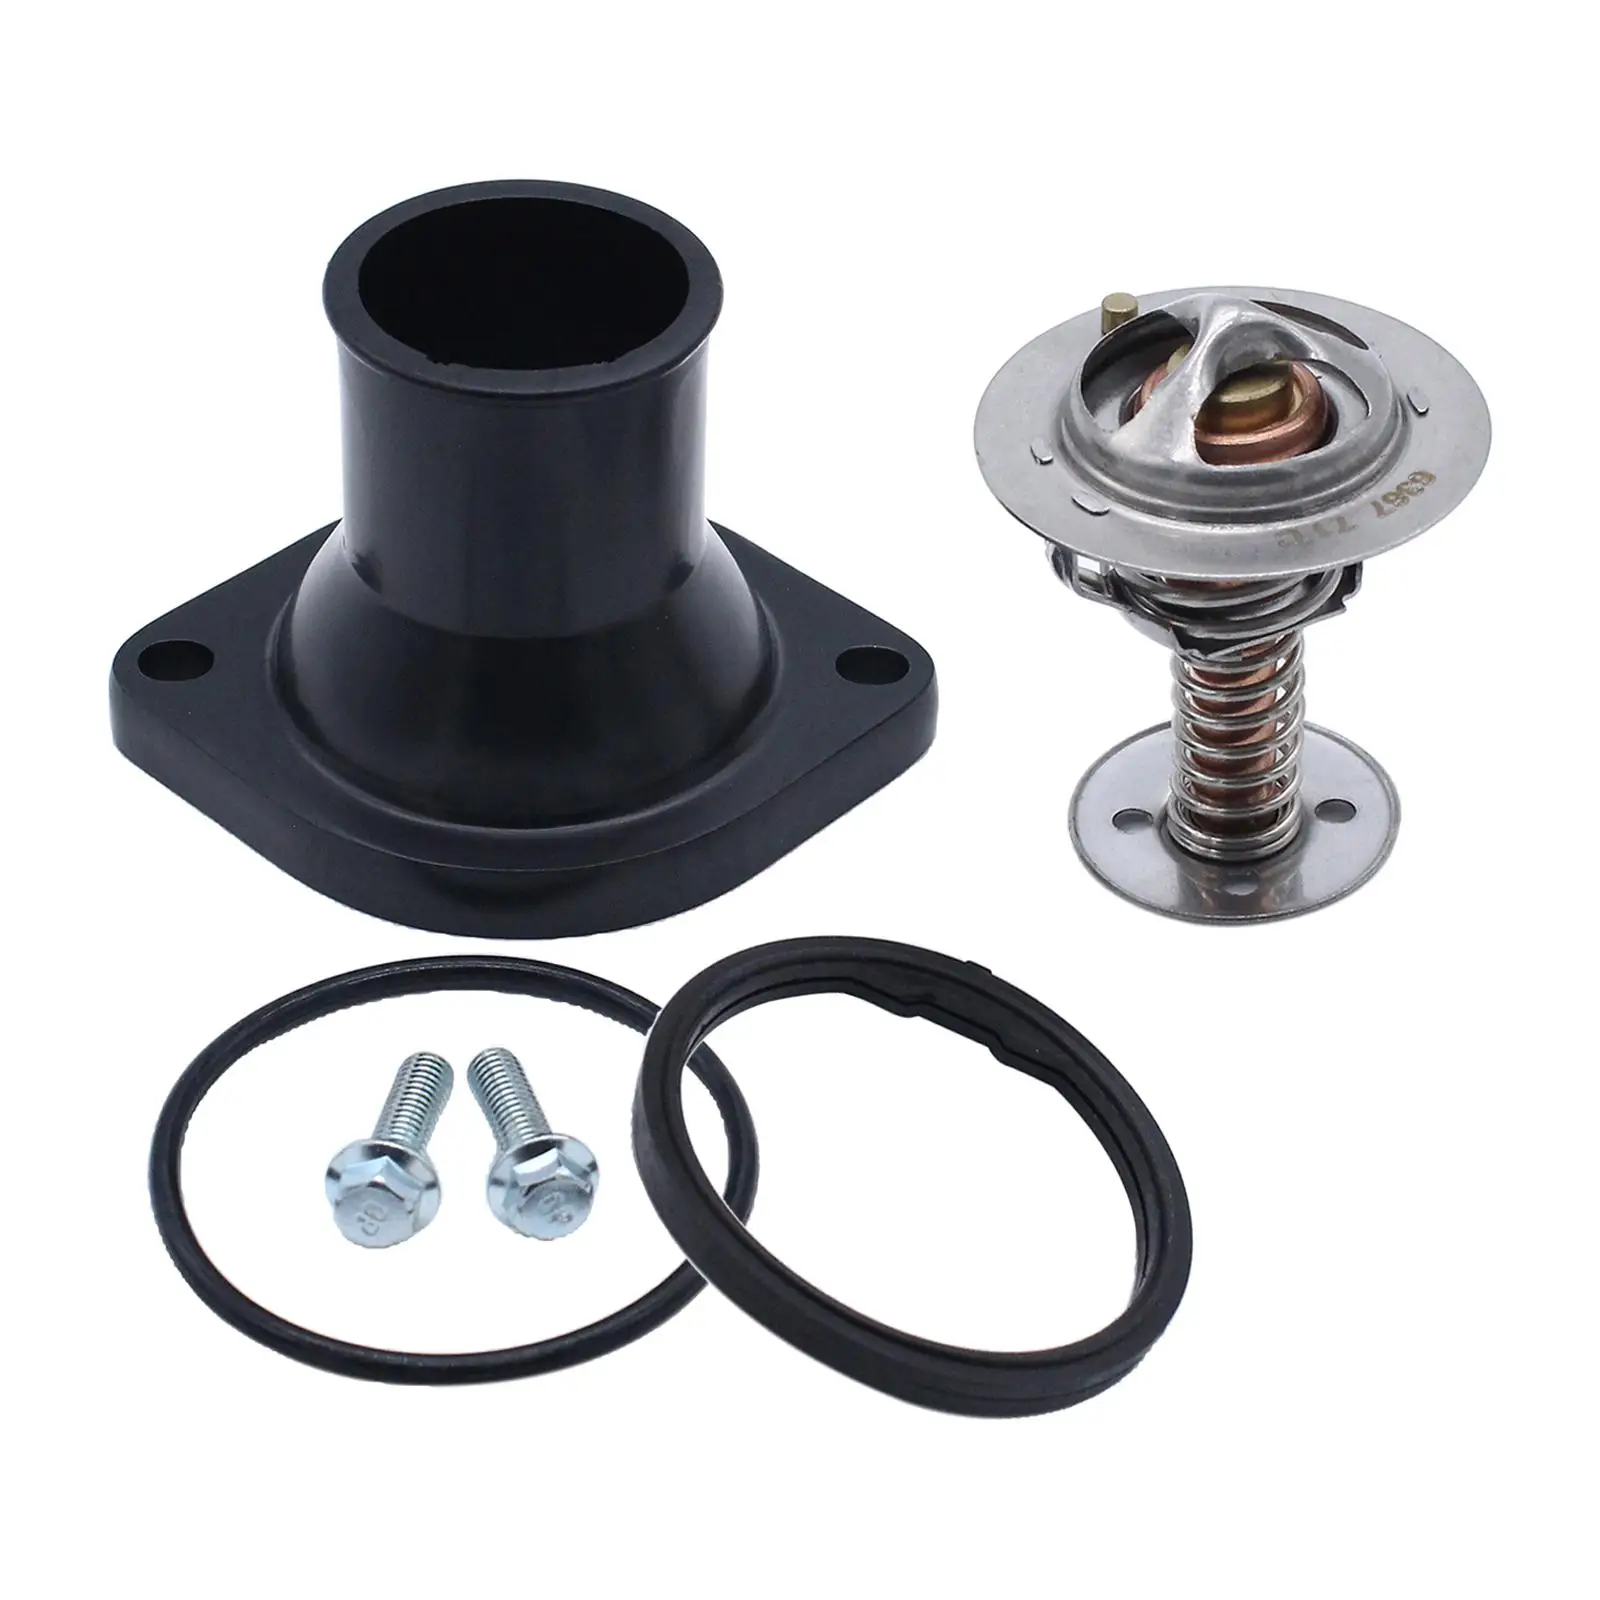 Water Neck Housing W/ Thermostat LS1 LS2 LS7 W/ Bolts O-Rings Fit for Chevy Water Neck Kits